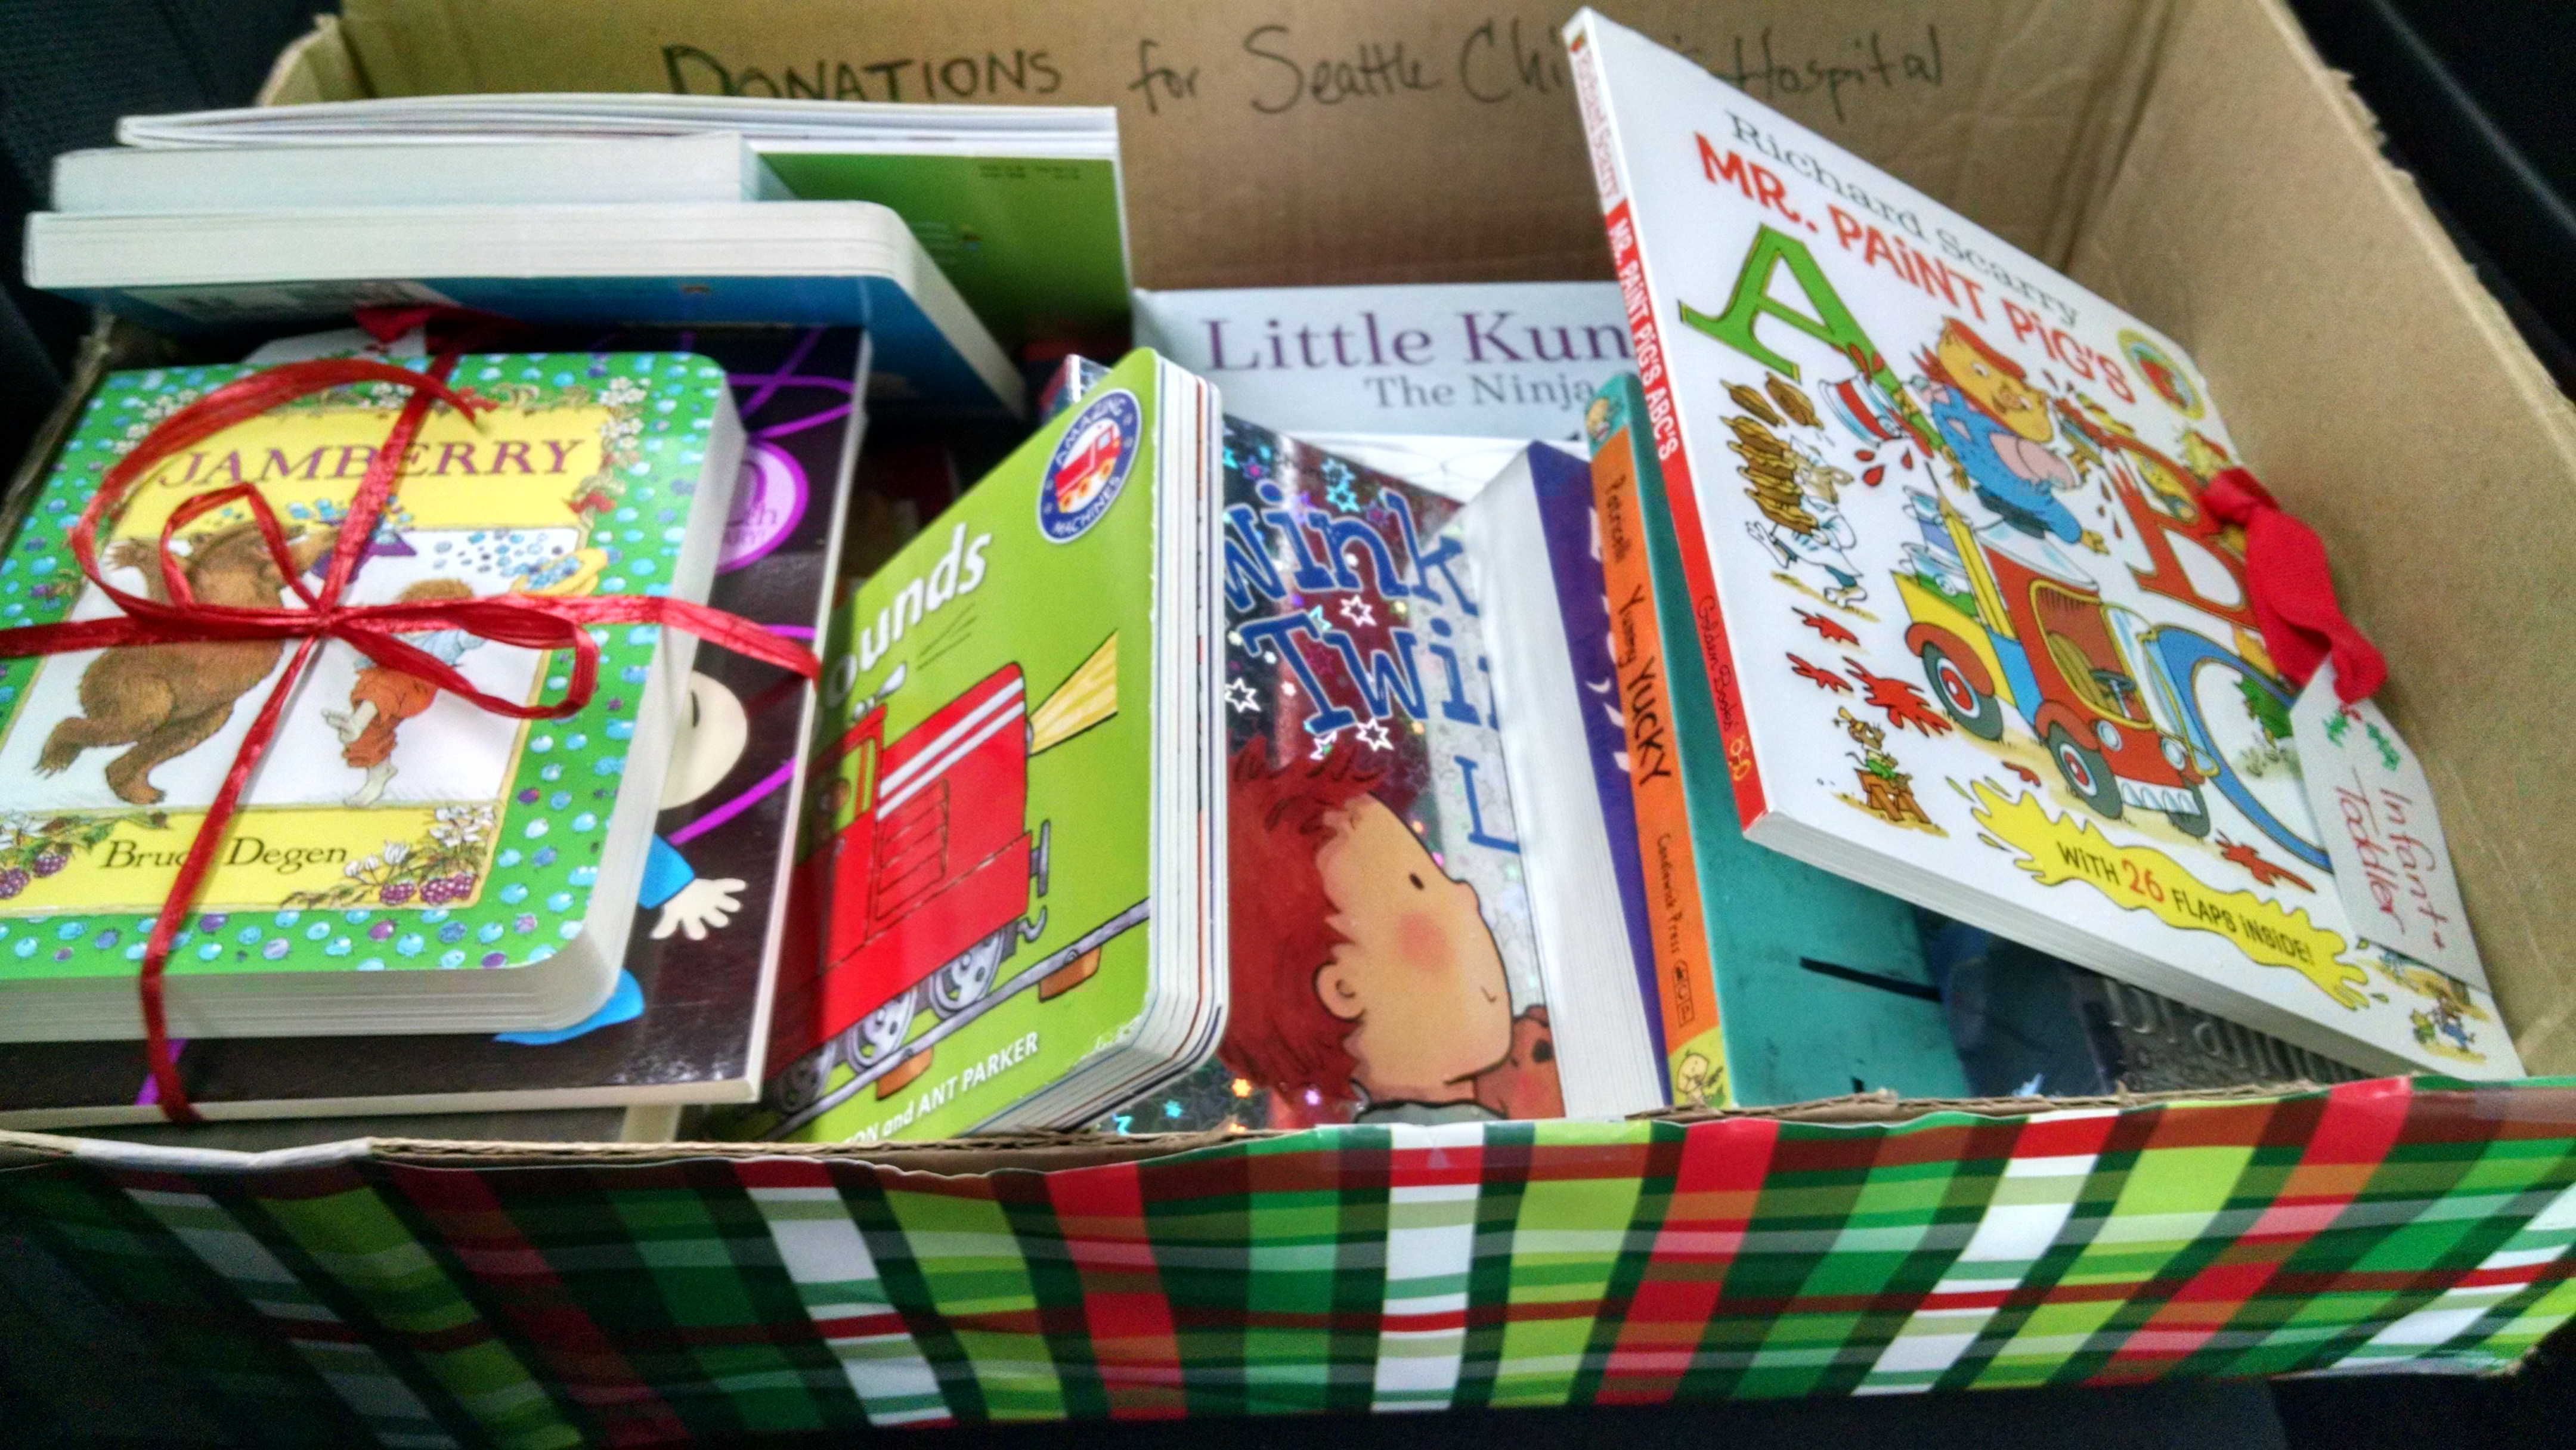 One of four boxes of donations from Queen Anne Book Company and its customers for Seattle Children's Hospital. Customers of Third Place Books also donated in the drive organized by The Neverending Bookshop.